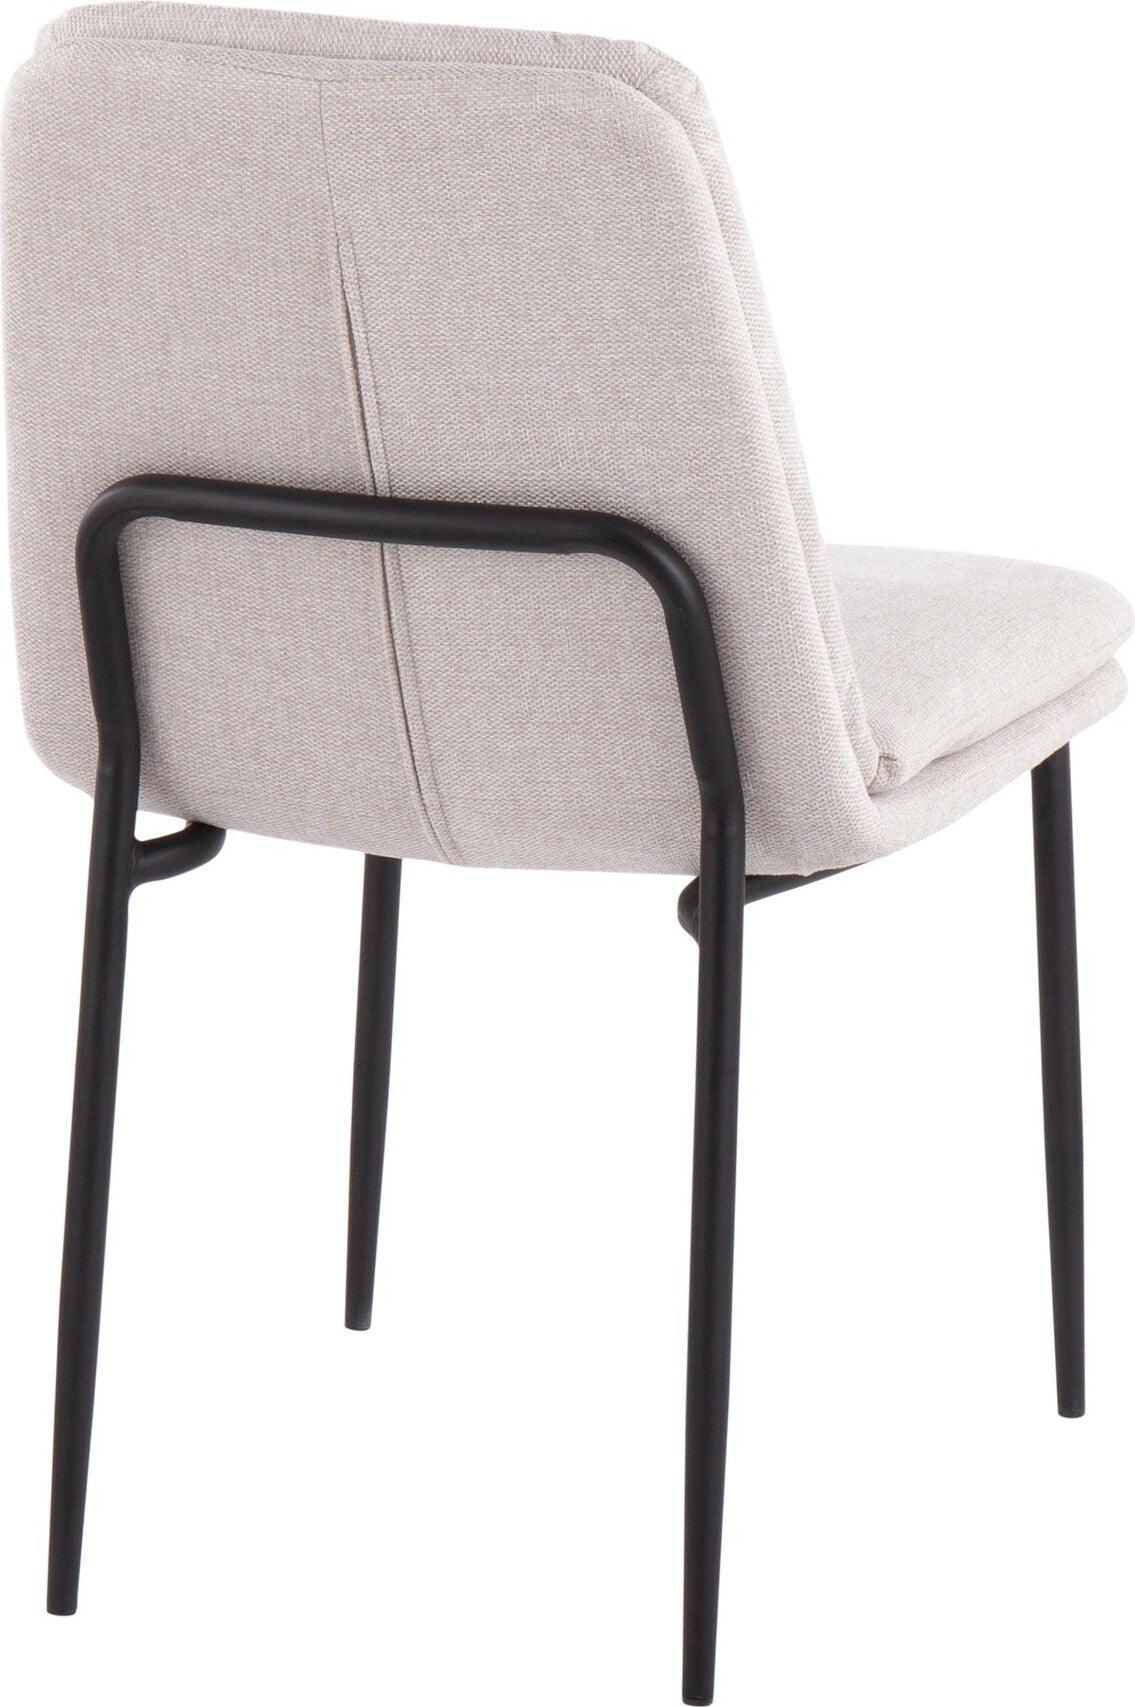 Lumisource Dining Chairs - Smith Contemporary Dining Chair in Black Steel and Cream Fabric (Set of 2)